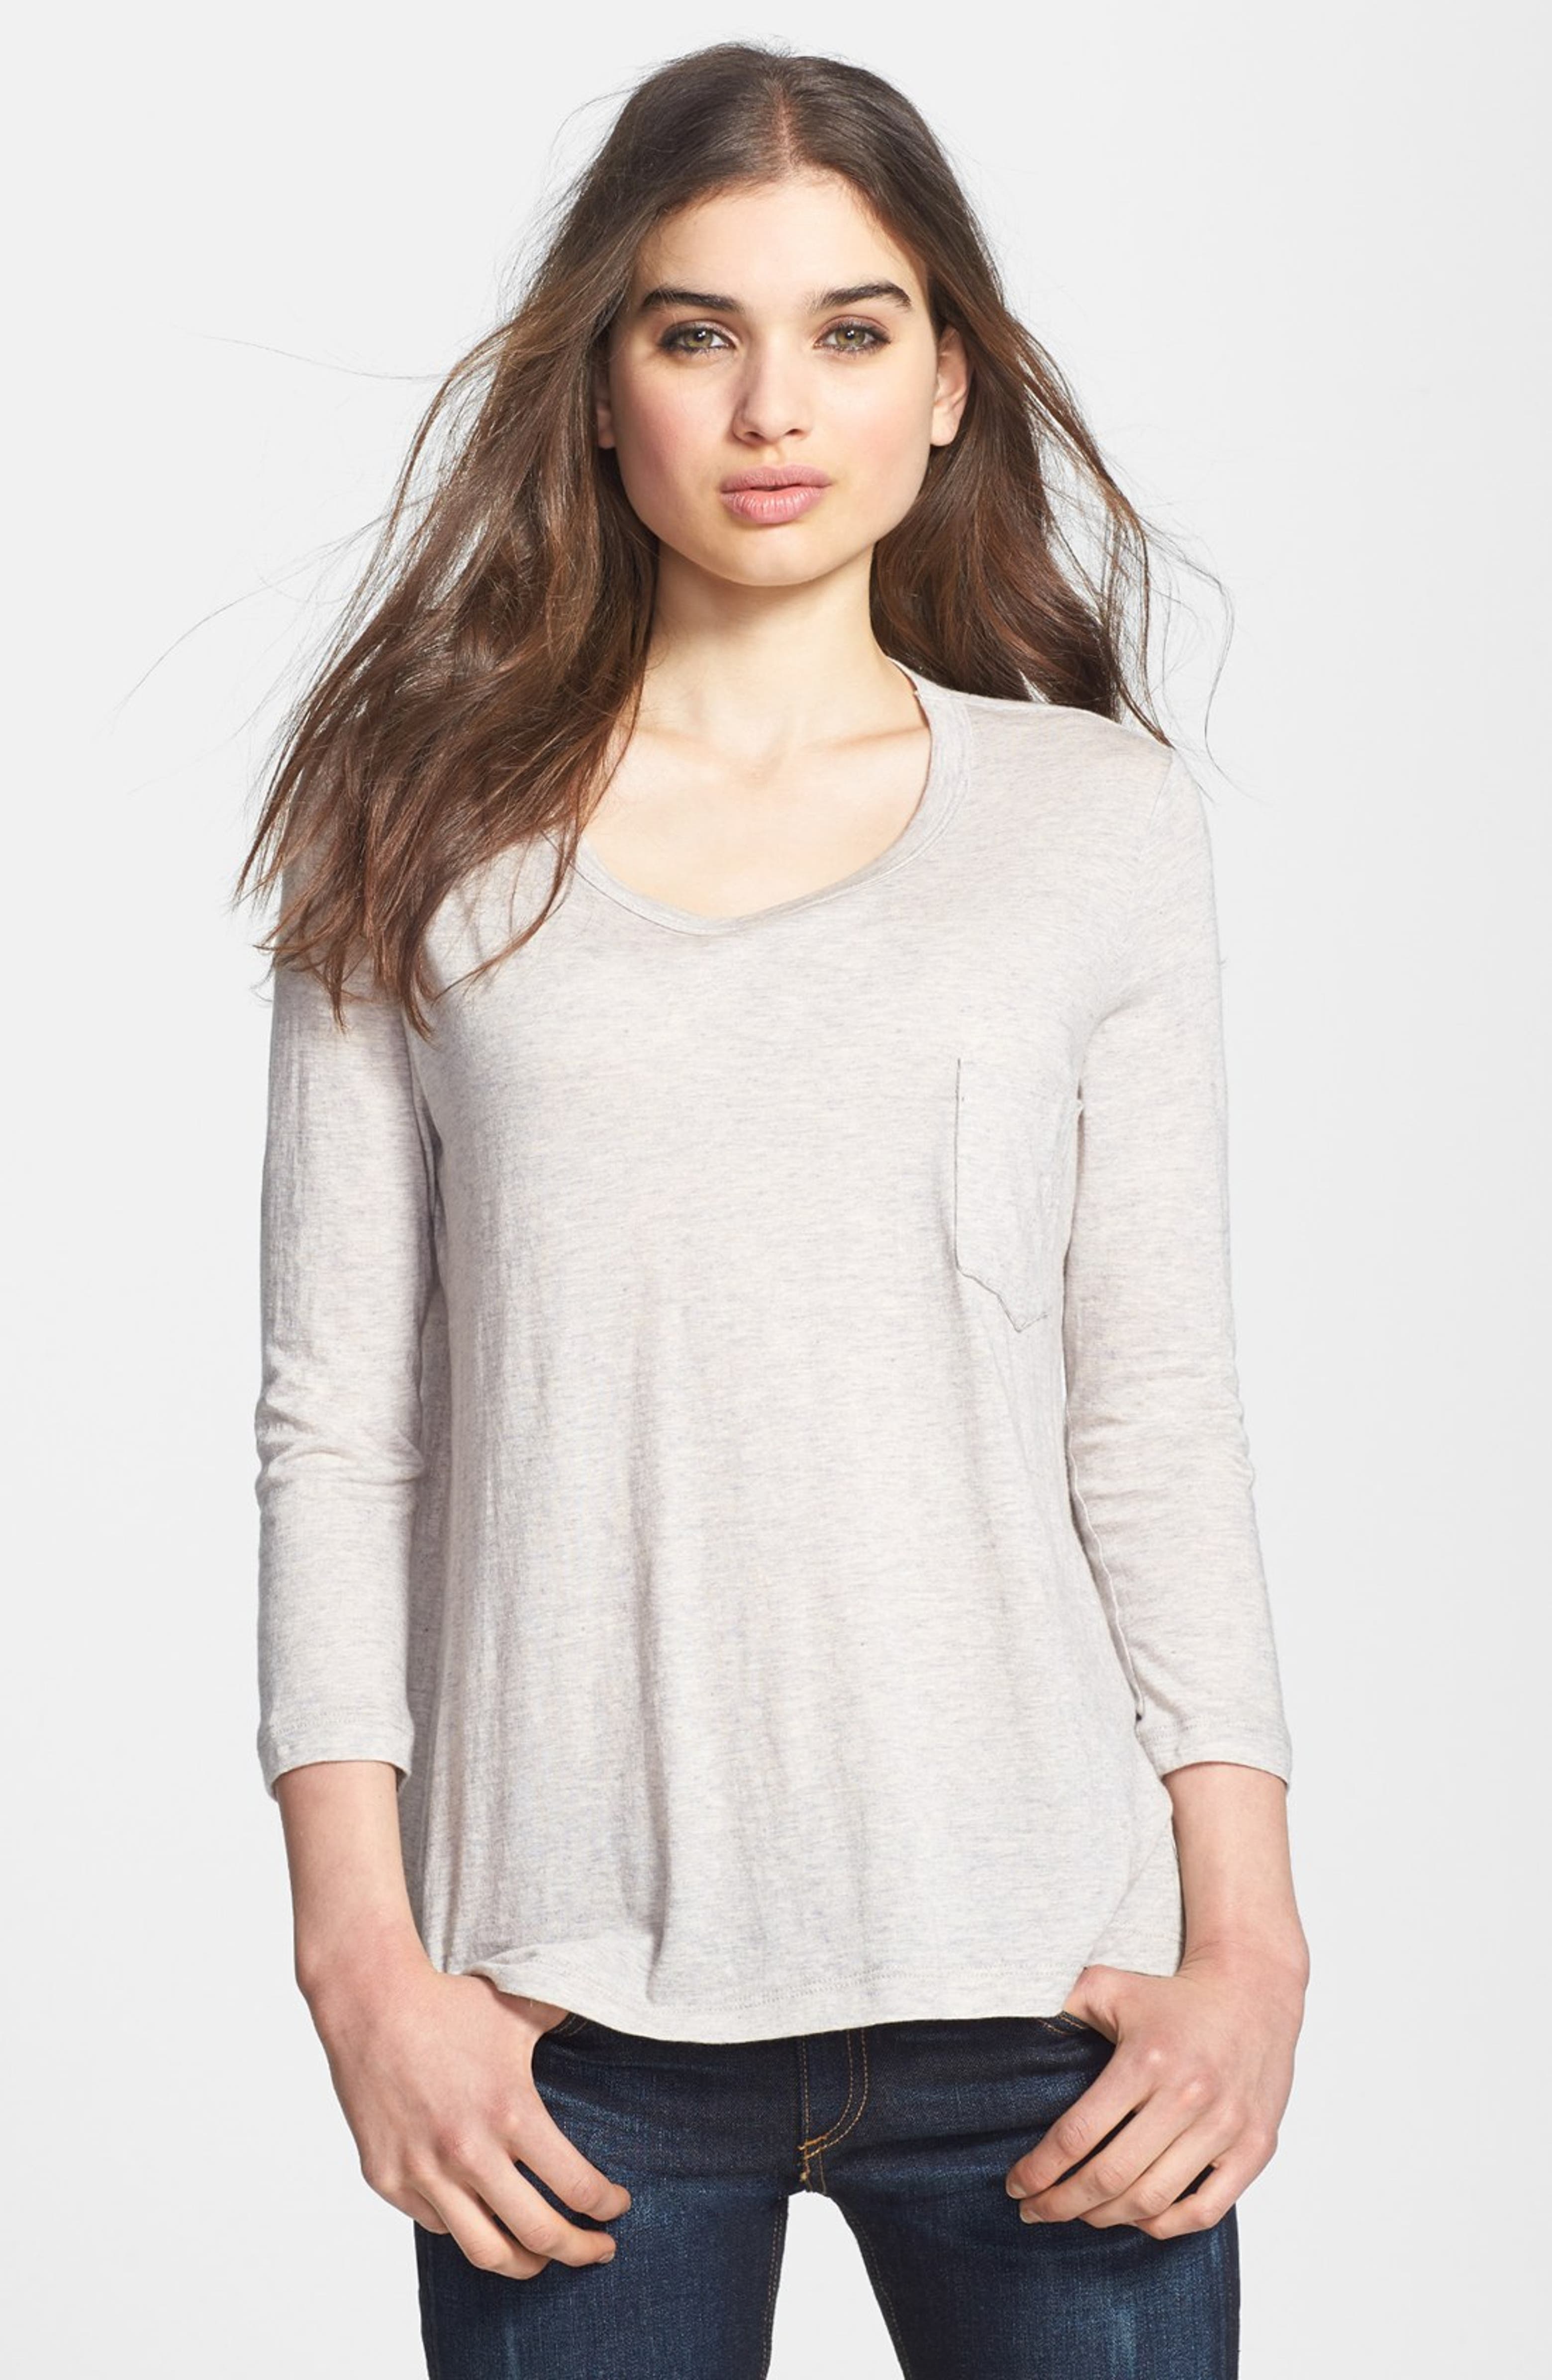 James Perse A-Line Pocket Tee | Nordstrom